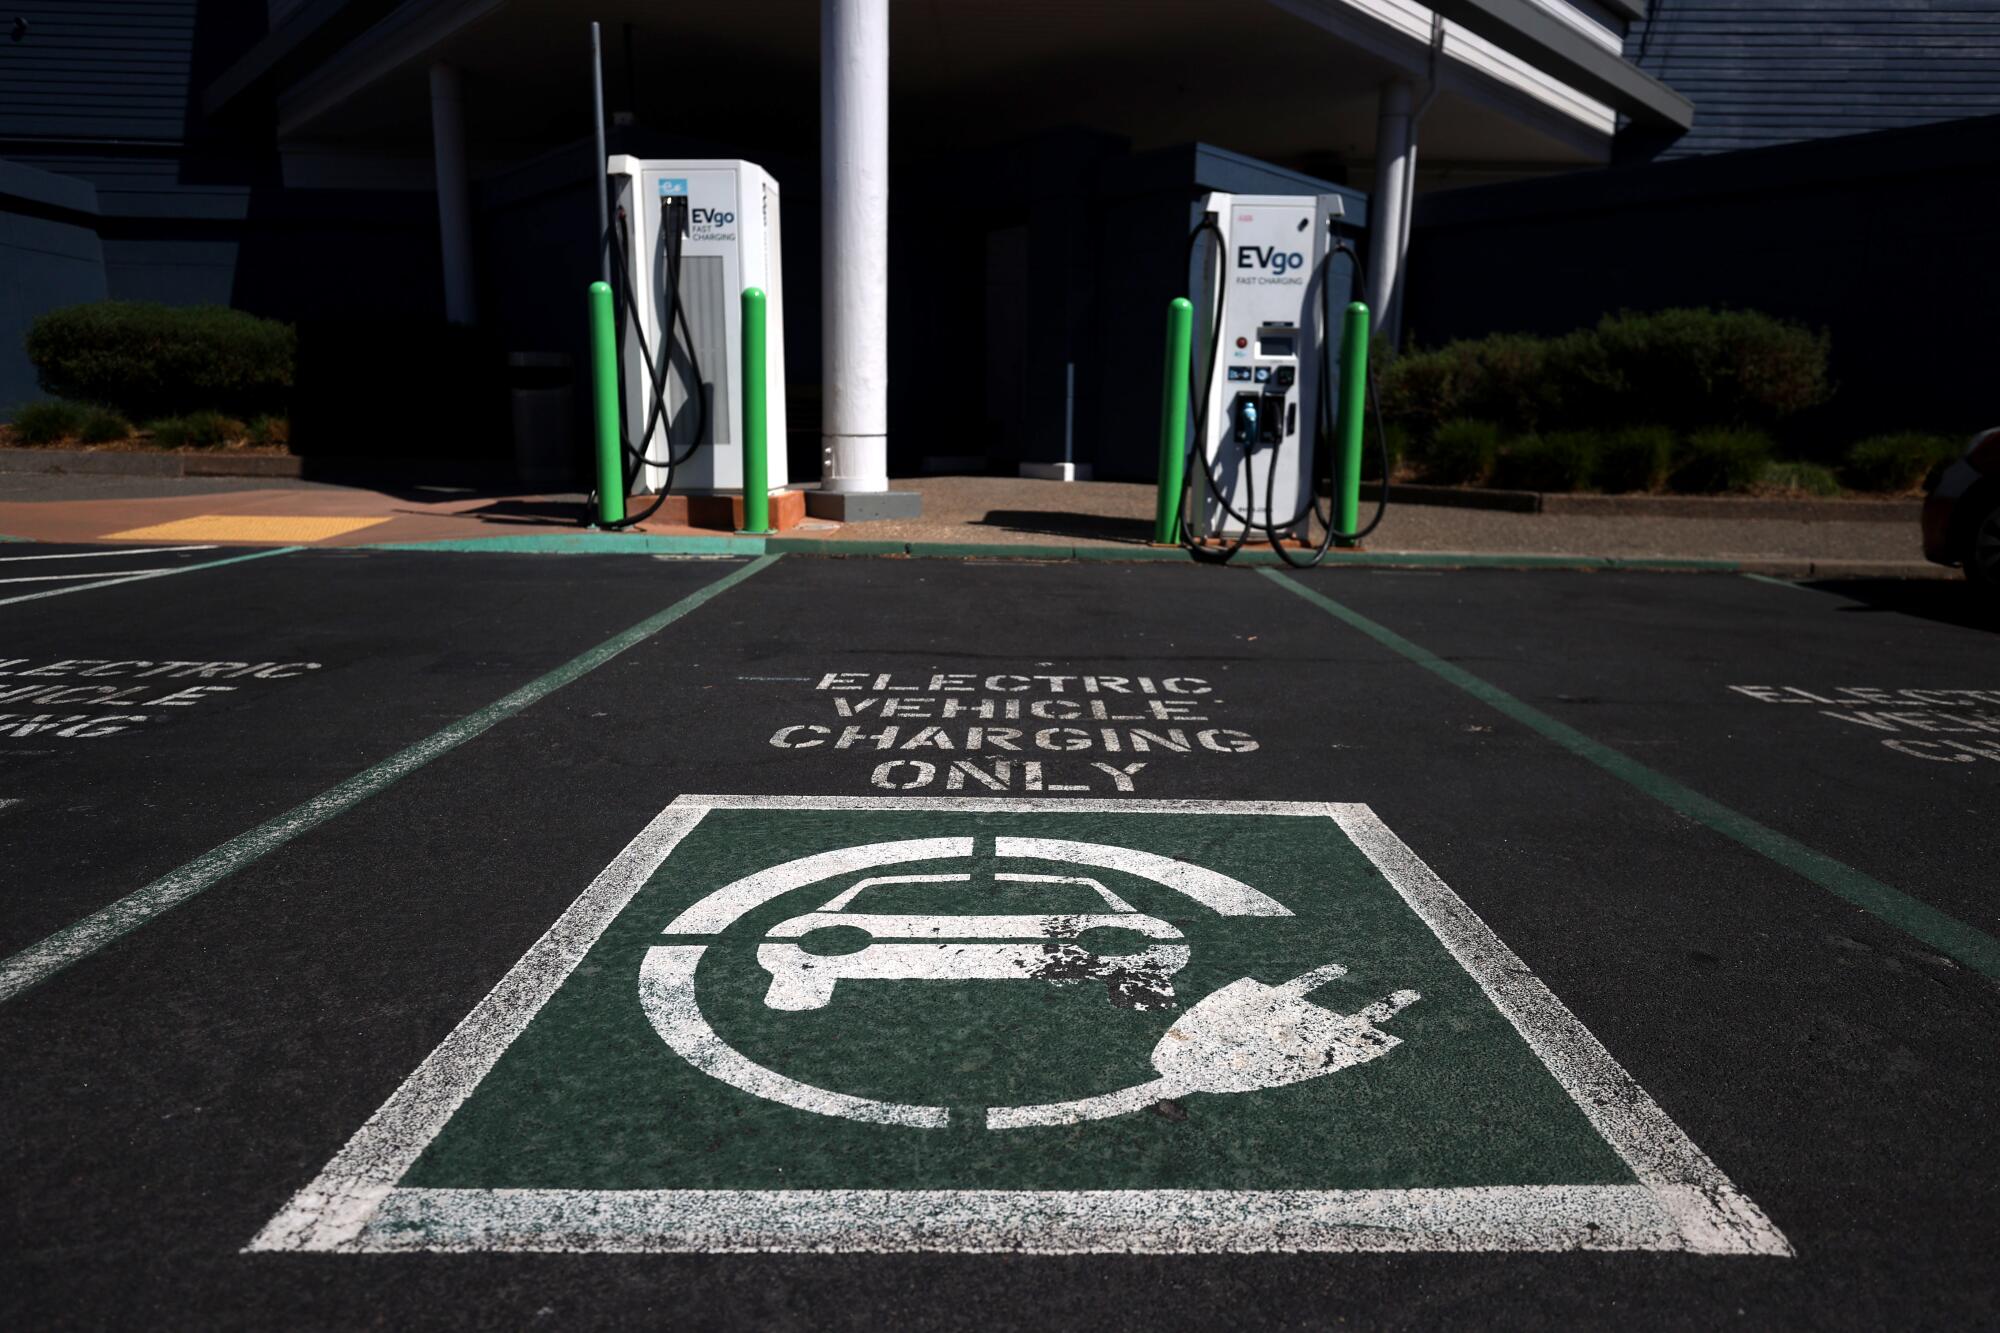 A parking spot labeled "Electric vehicle charging only" with an EV graphic, in front of two charging stations in a dark lot